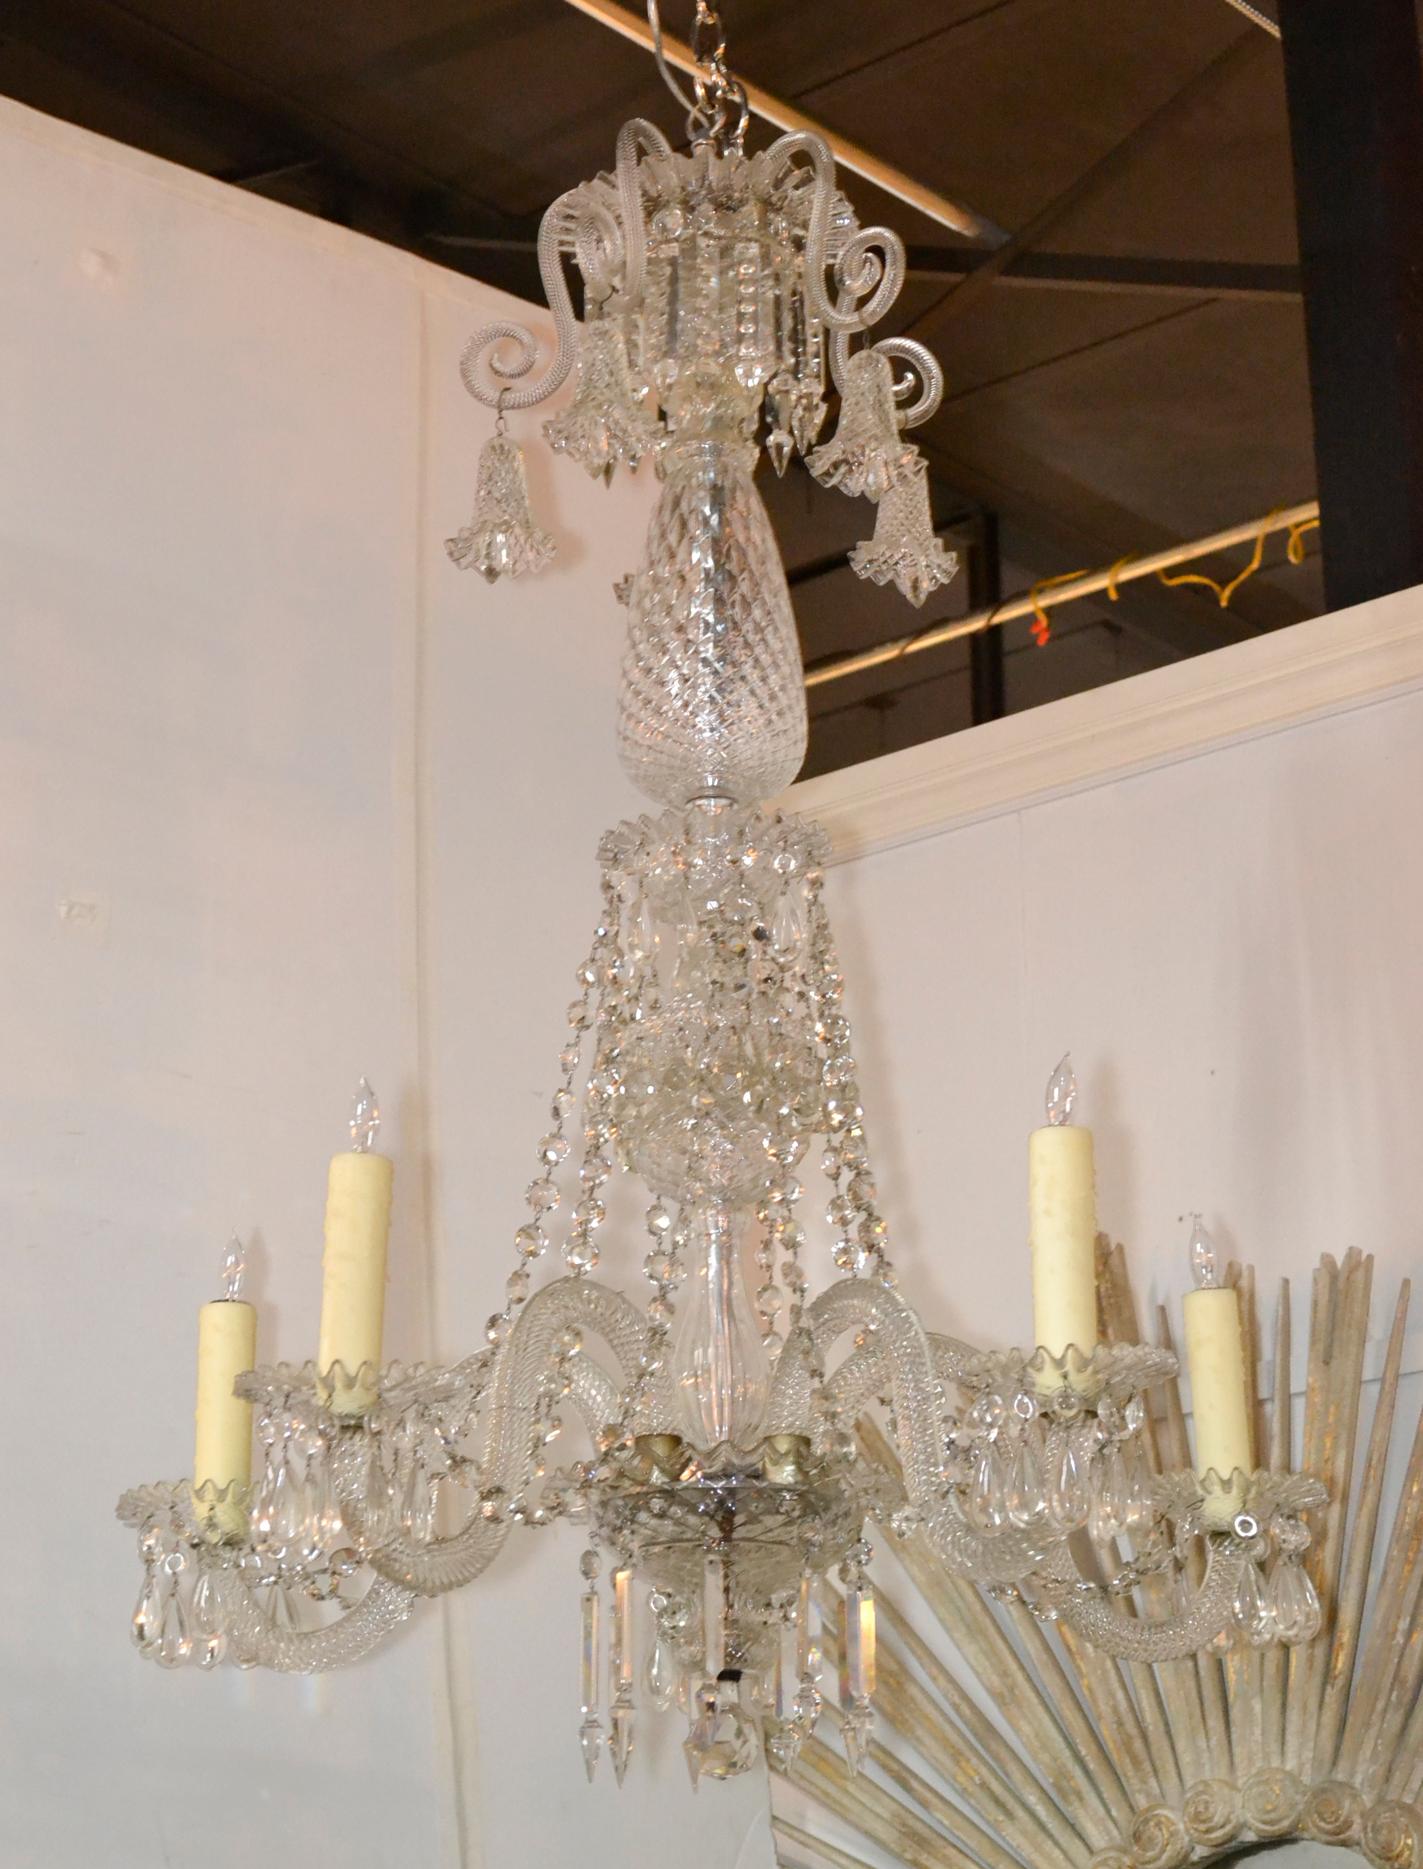 19th Century Baccarat Style Crystal Chandelier In Good Condition For Sale In Dallas, TX